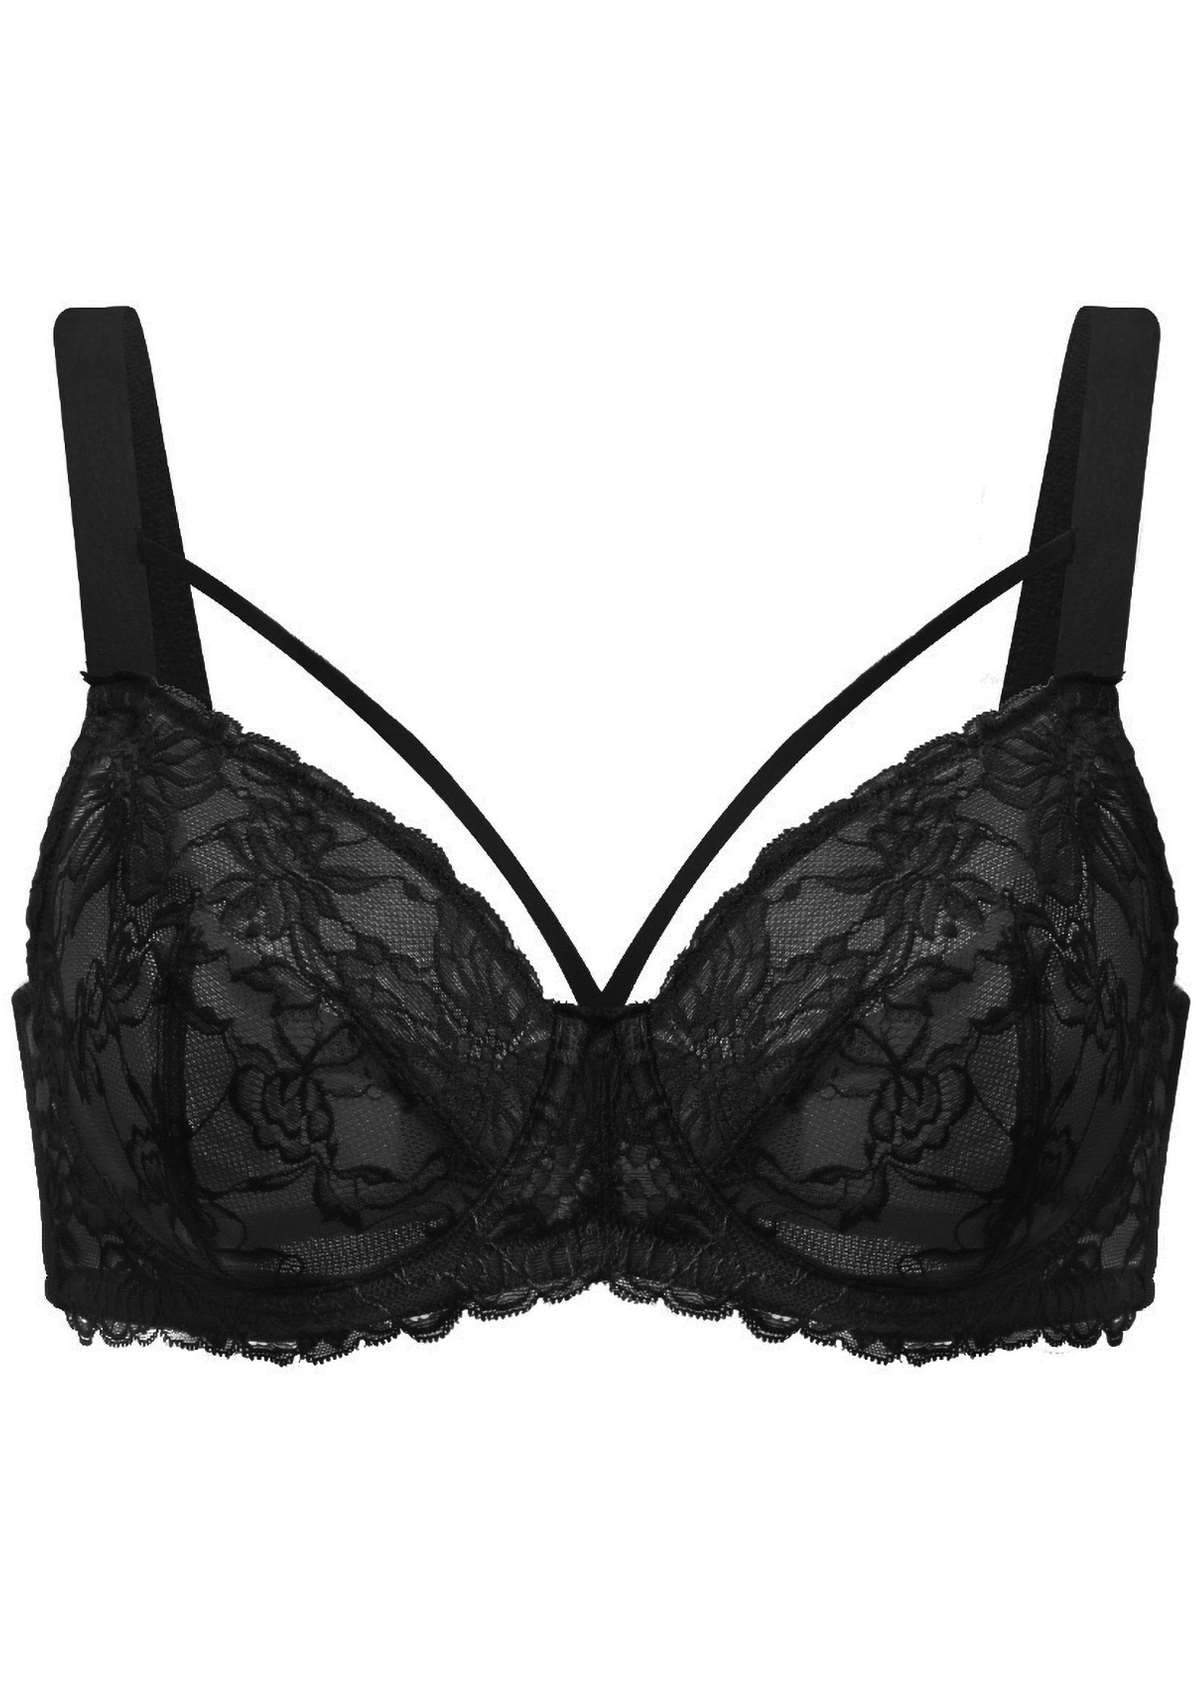 HSIA Pretty In Petals Bra - Plus Size Lingerie For Comfrot And Support - Black / 34 / I